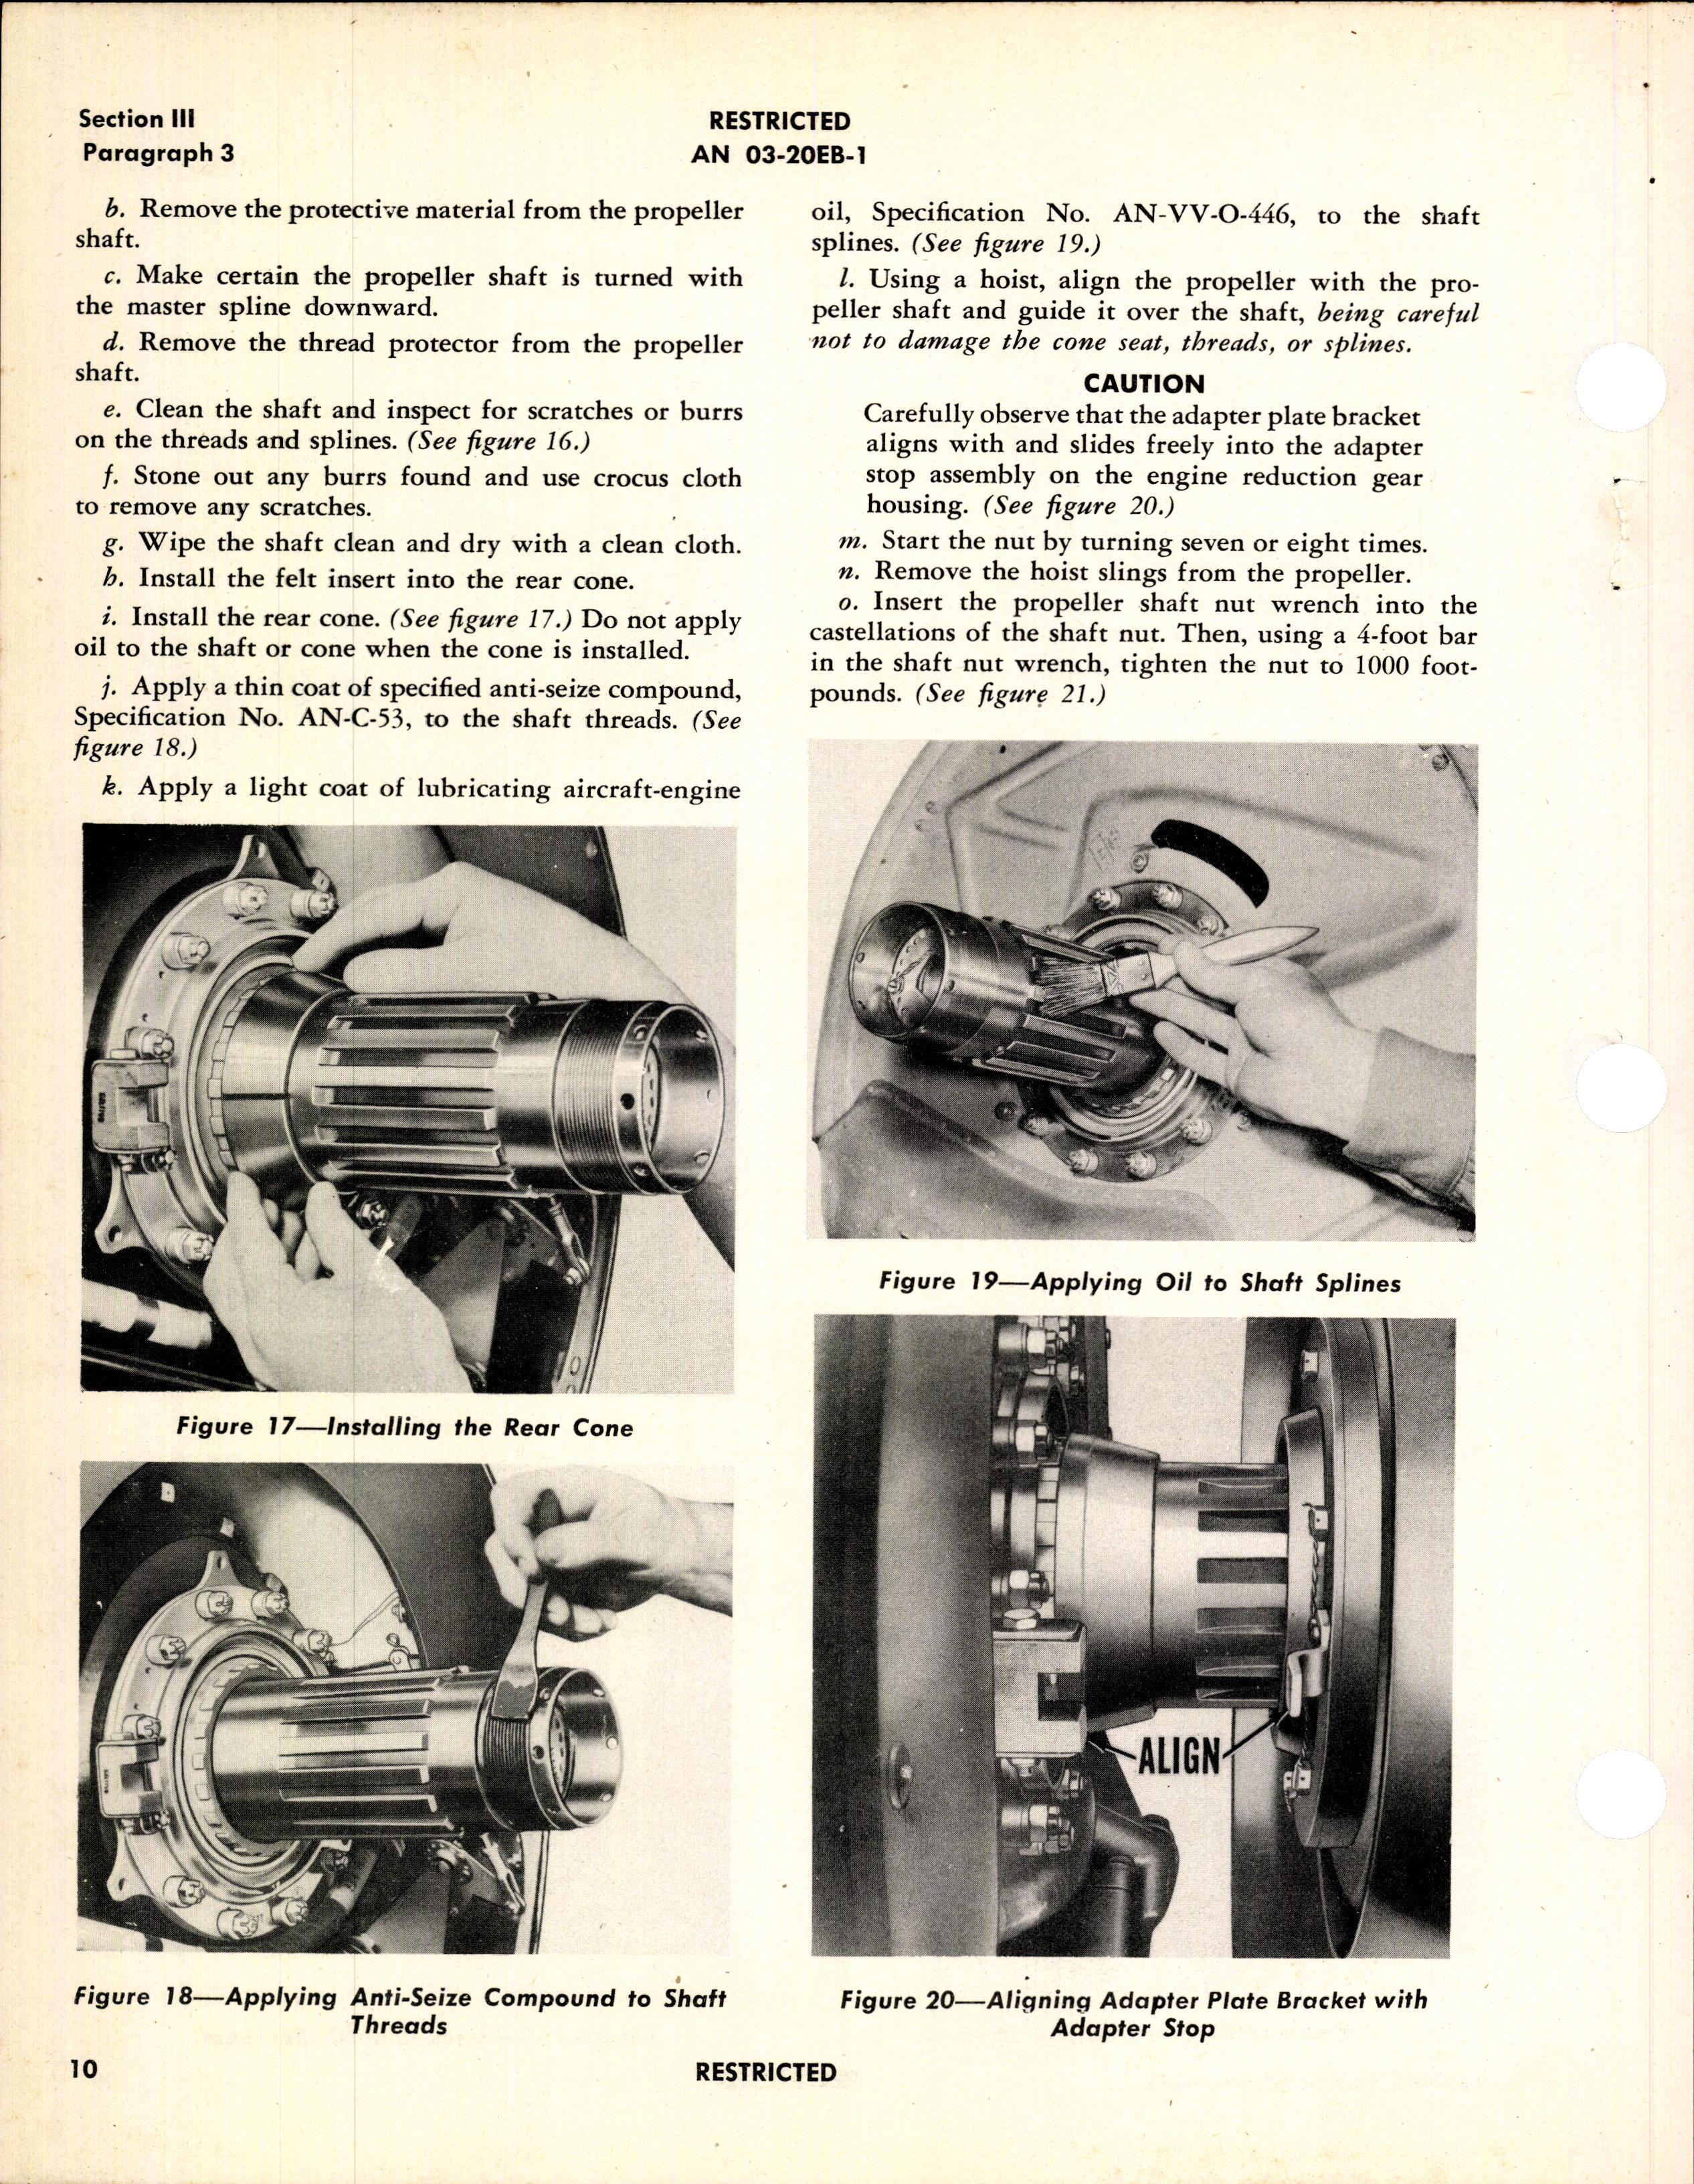 Sample page 8 from AirCorps Library document: Operation, Service, & Overhaul Instructions with Parts Catalog for Hydraulic Controllable Propellers